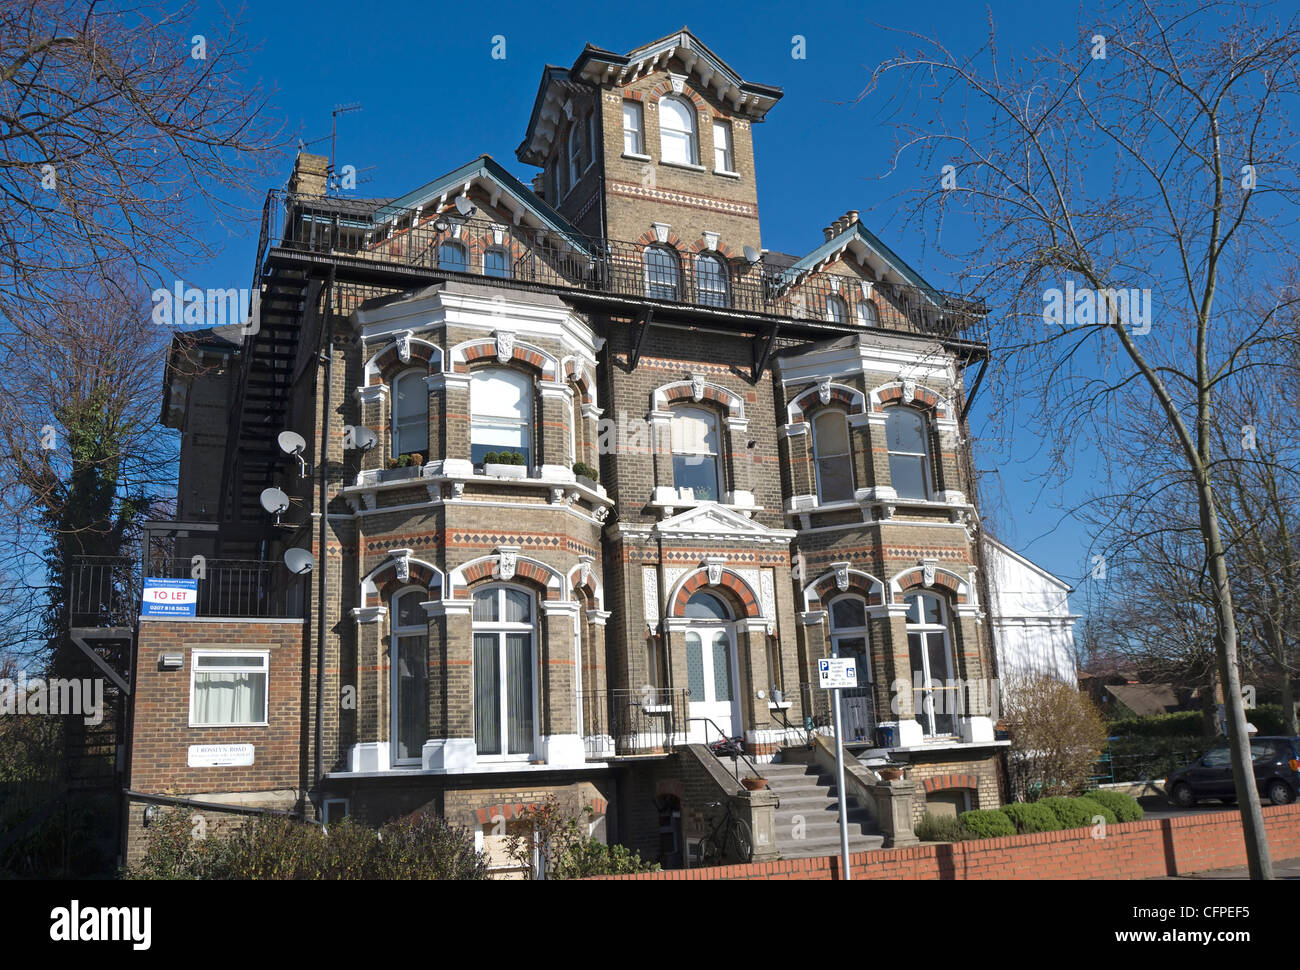 carisbrooke house, a victorian gothic style house in east twickenham, middlesex, england, with modern ground floor extension to left Stock Photo